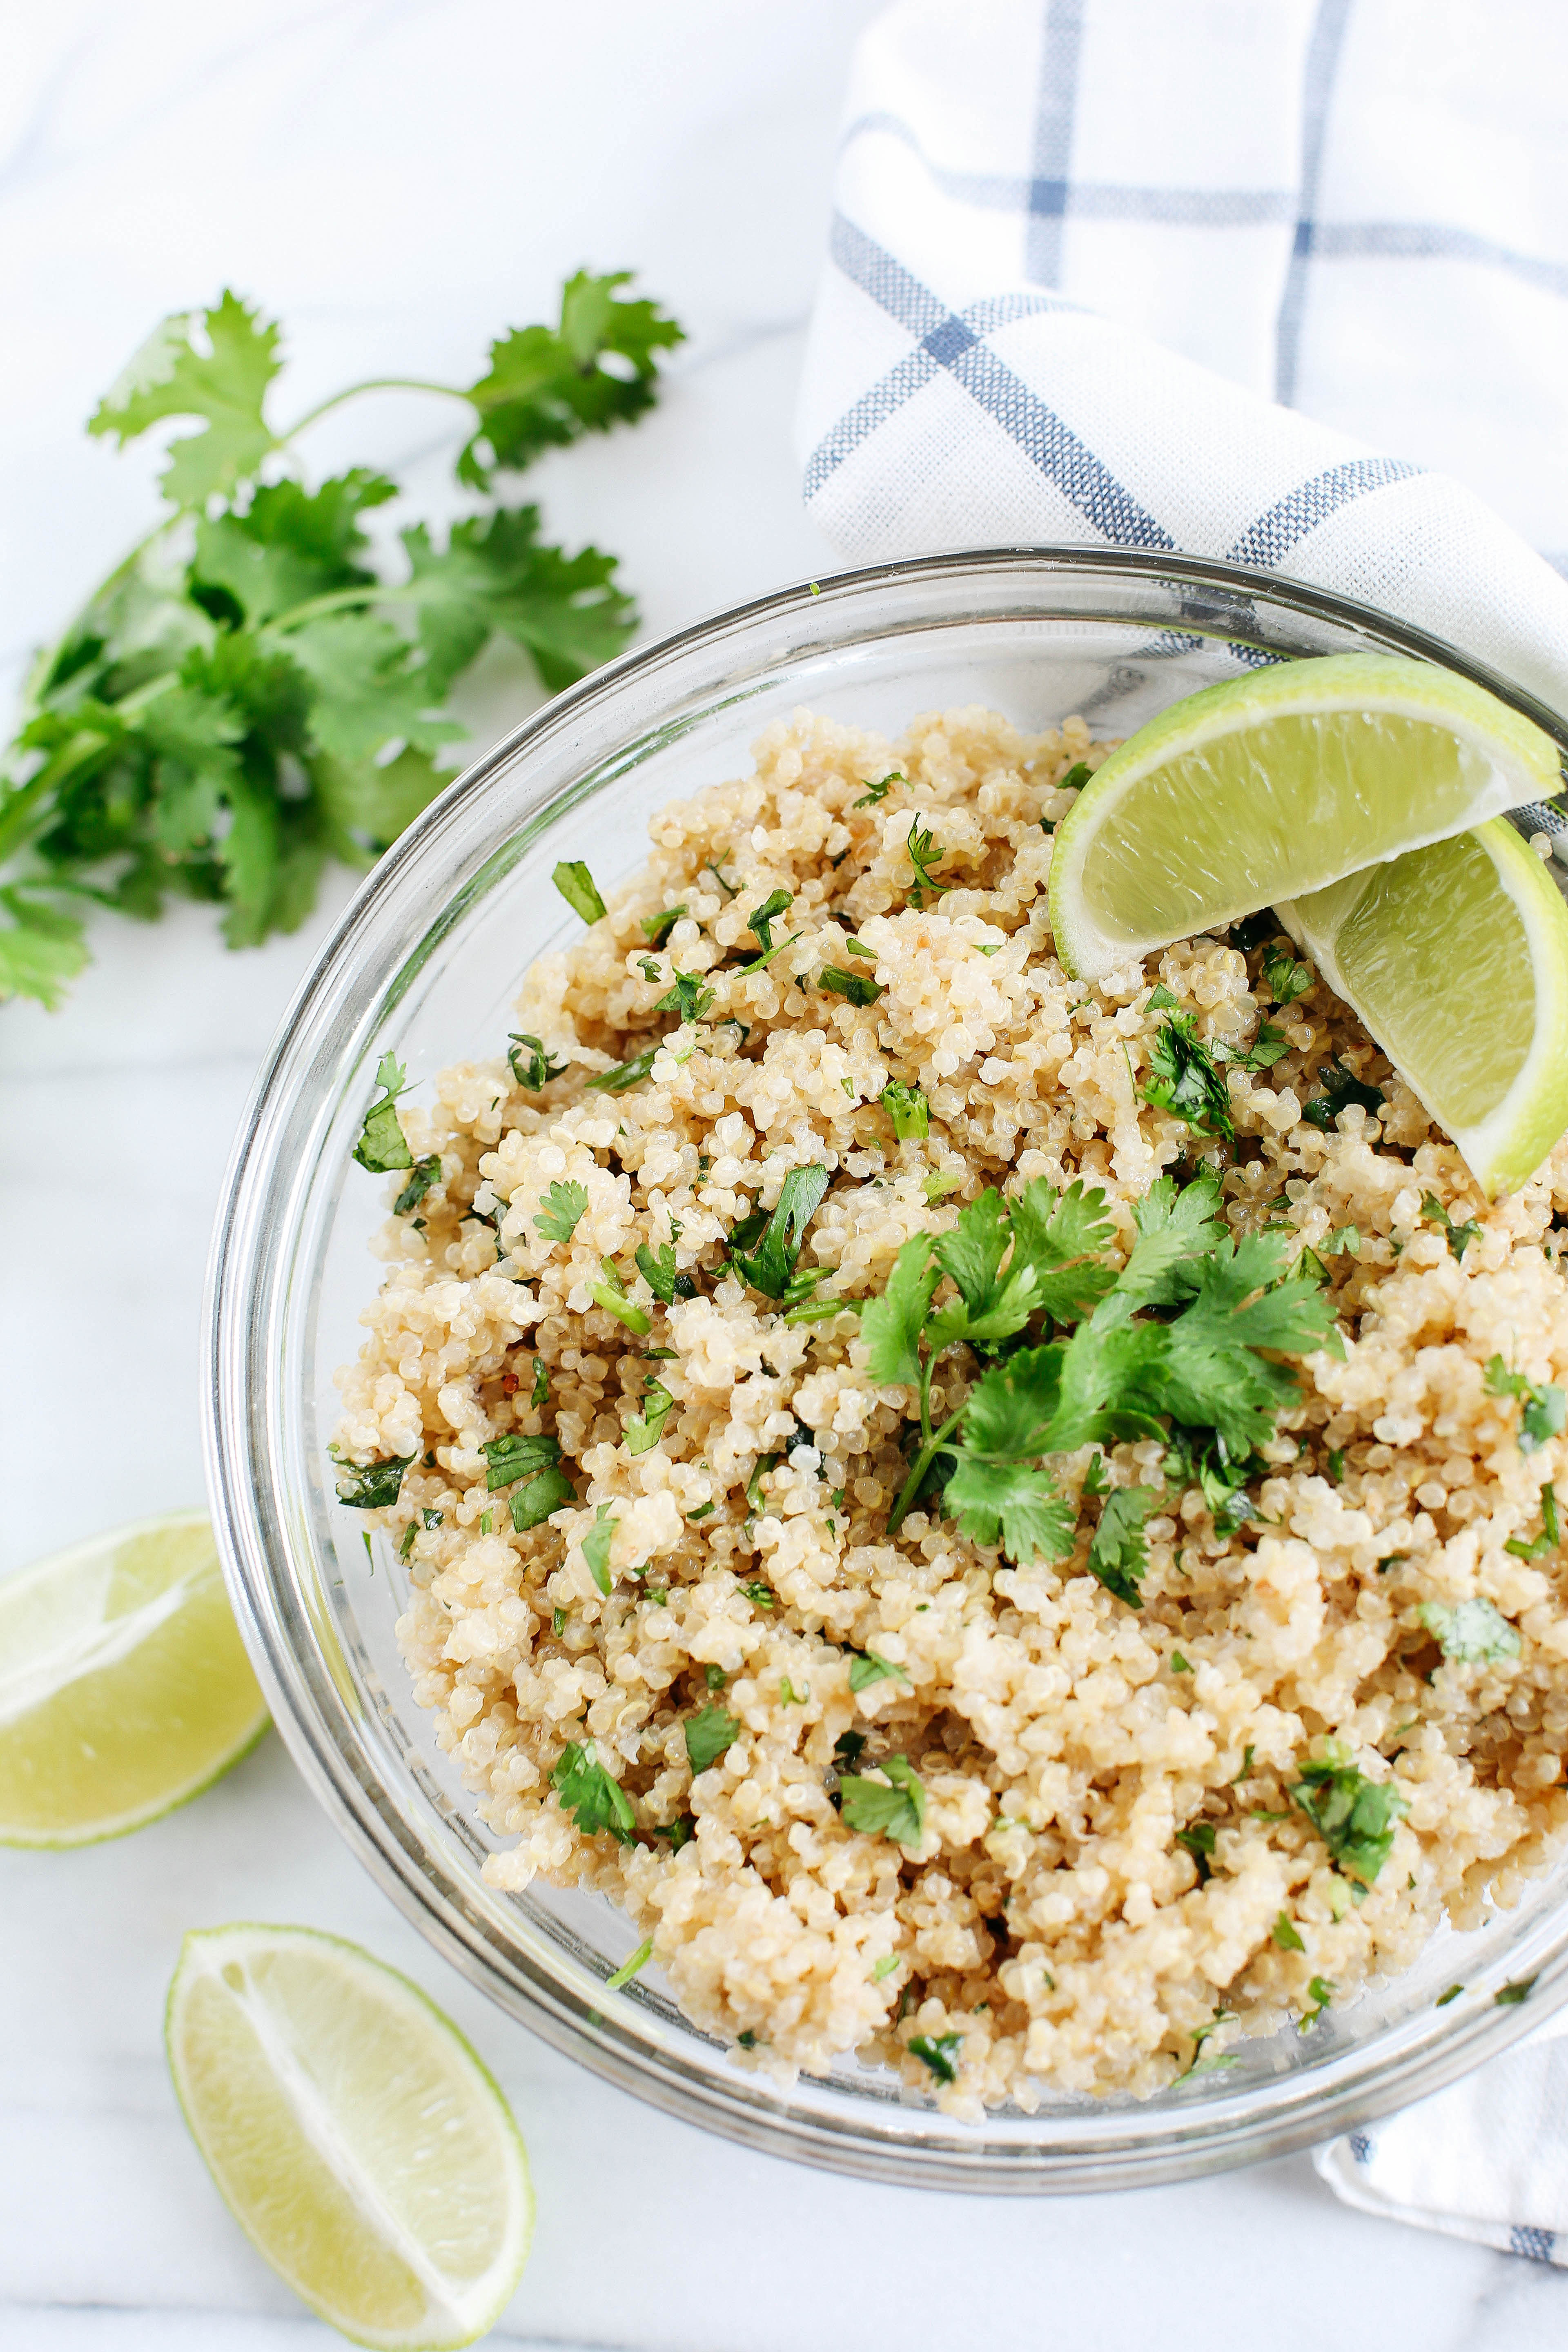 This Coconut Lime Cilantro Quinoa is easily made with just a few simple ingredients and makes the perfect healthy side dish to any meal!